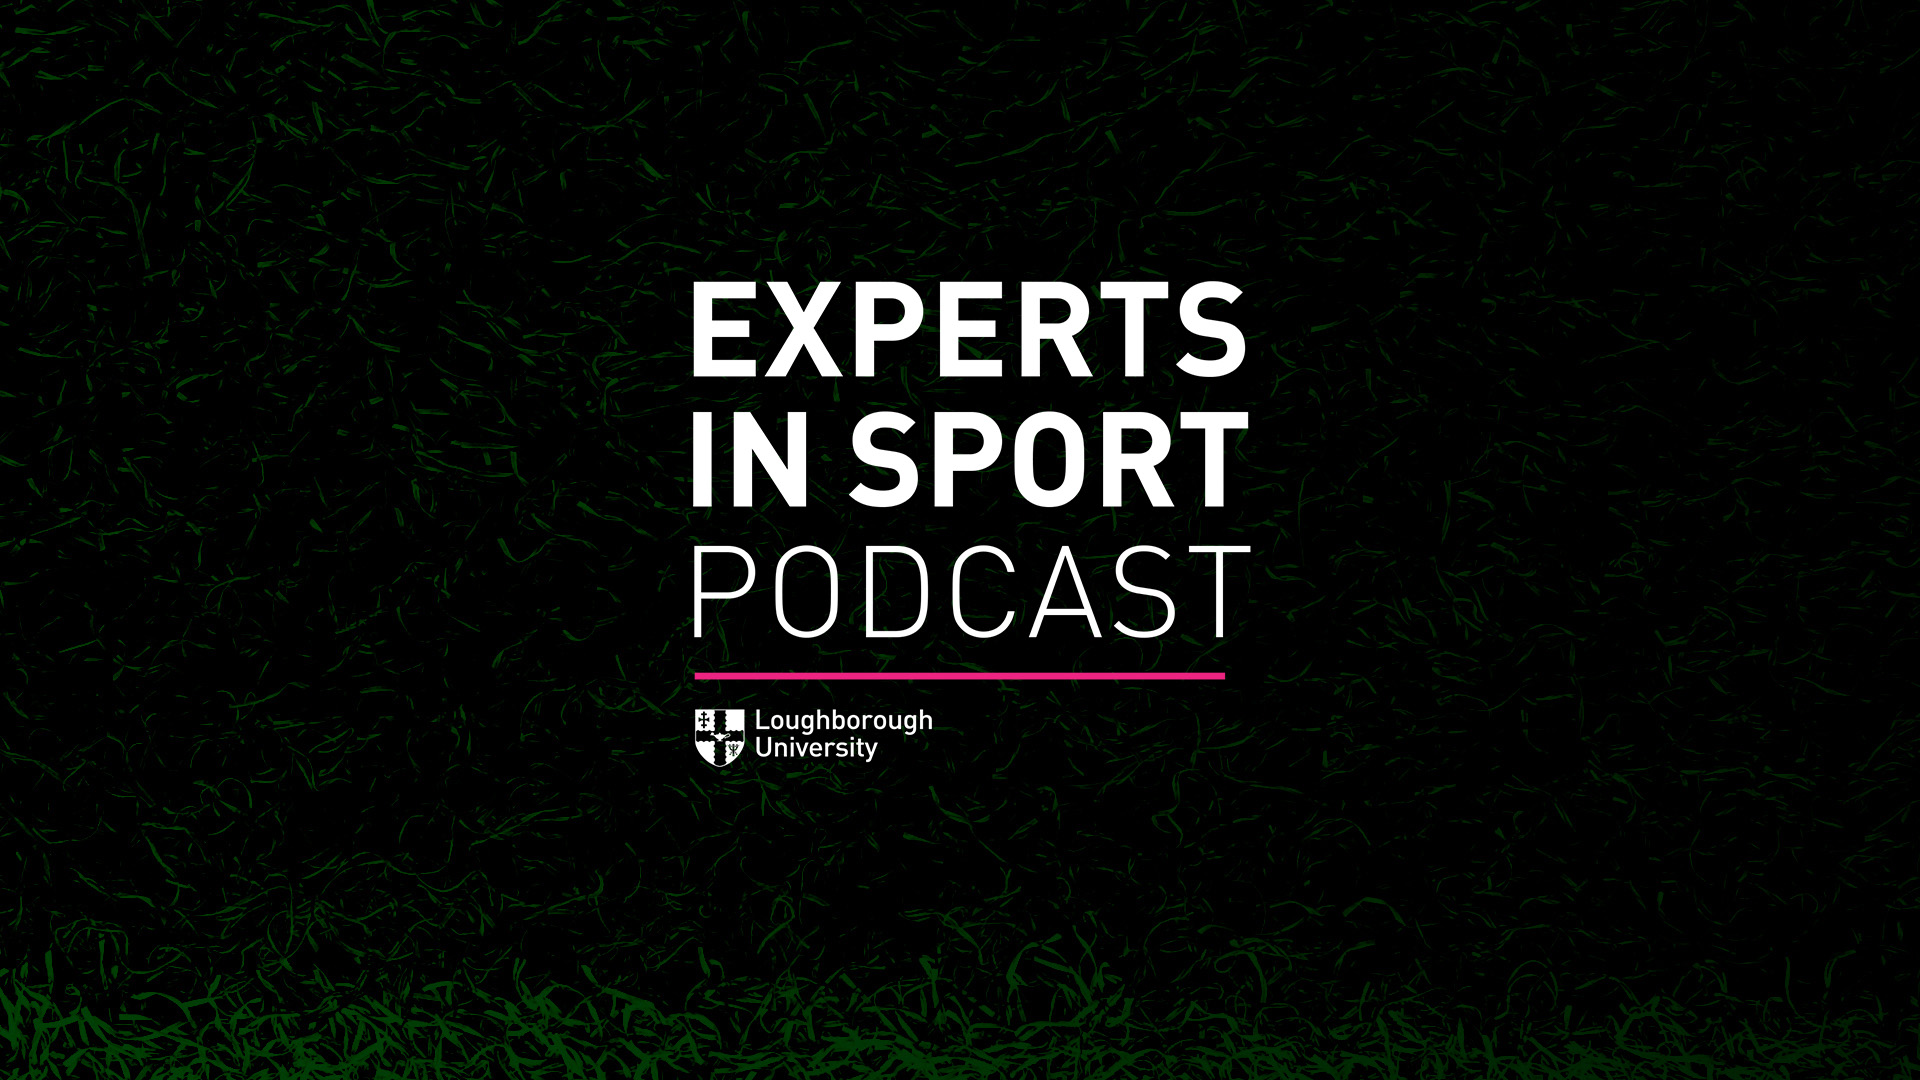 Image of grass with the Experts in Sport logo overlaid